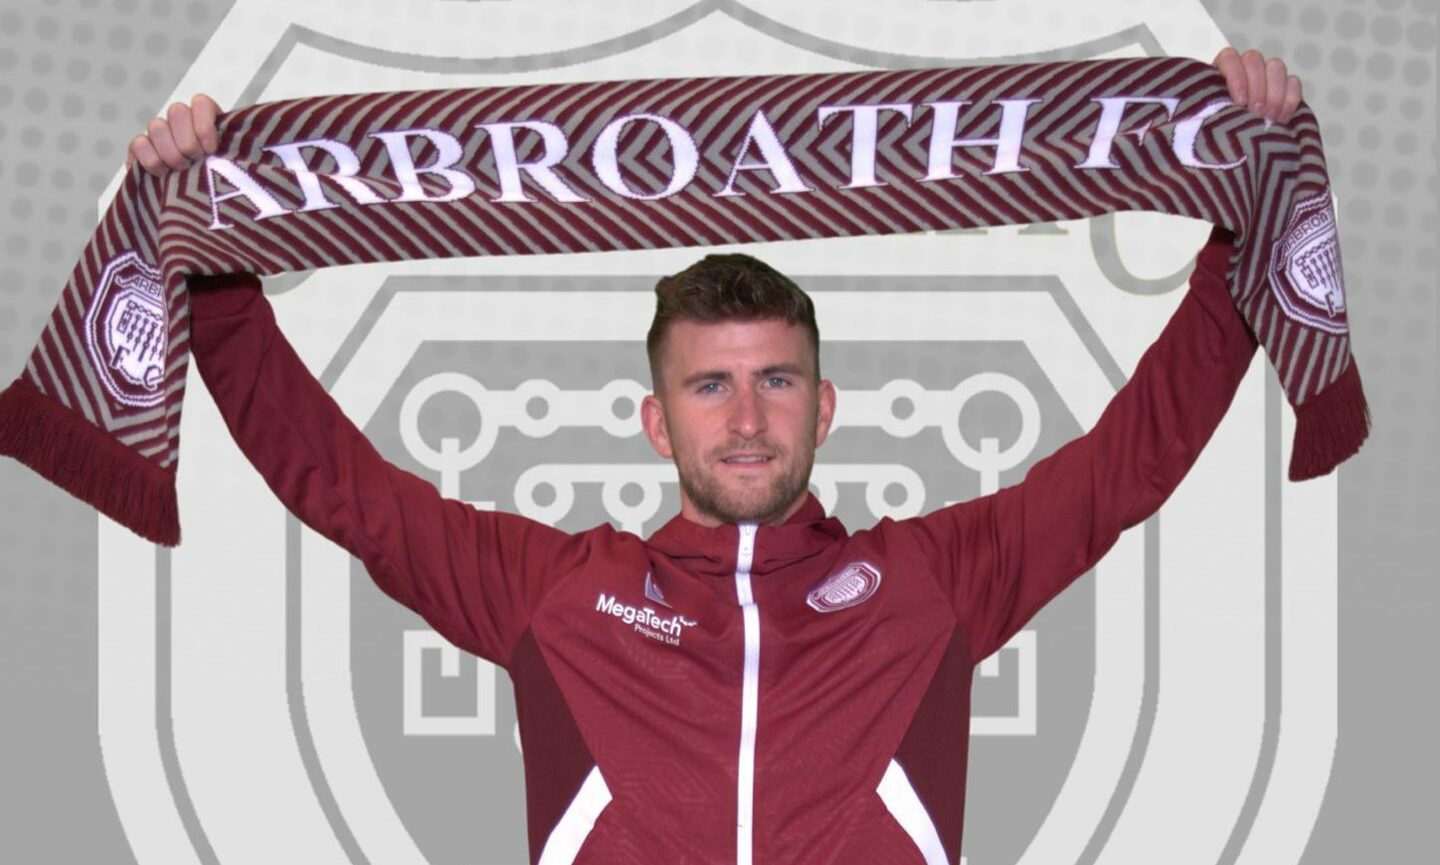 Craig Slater hopes to entertain fans making after Arbroath move